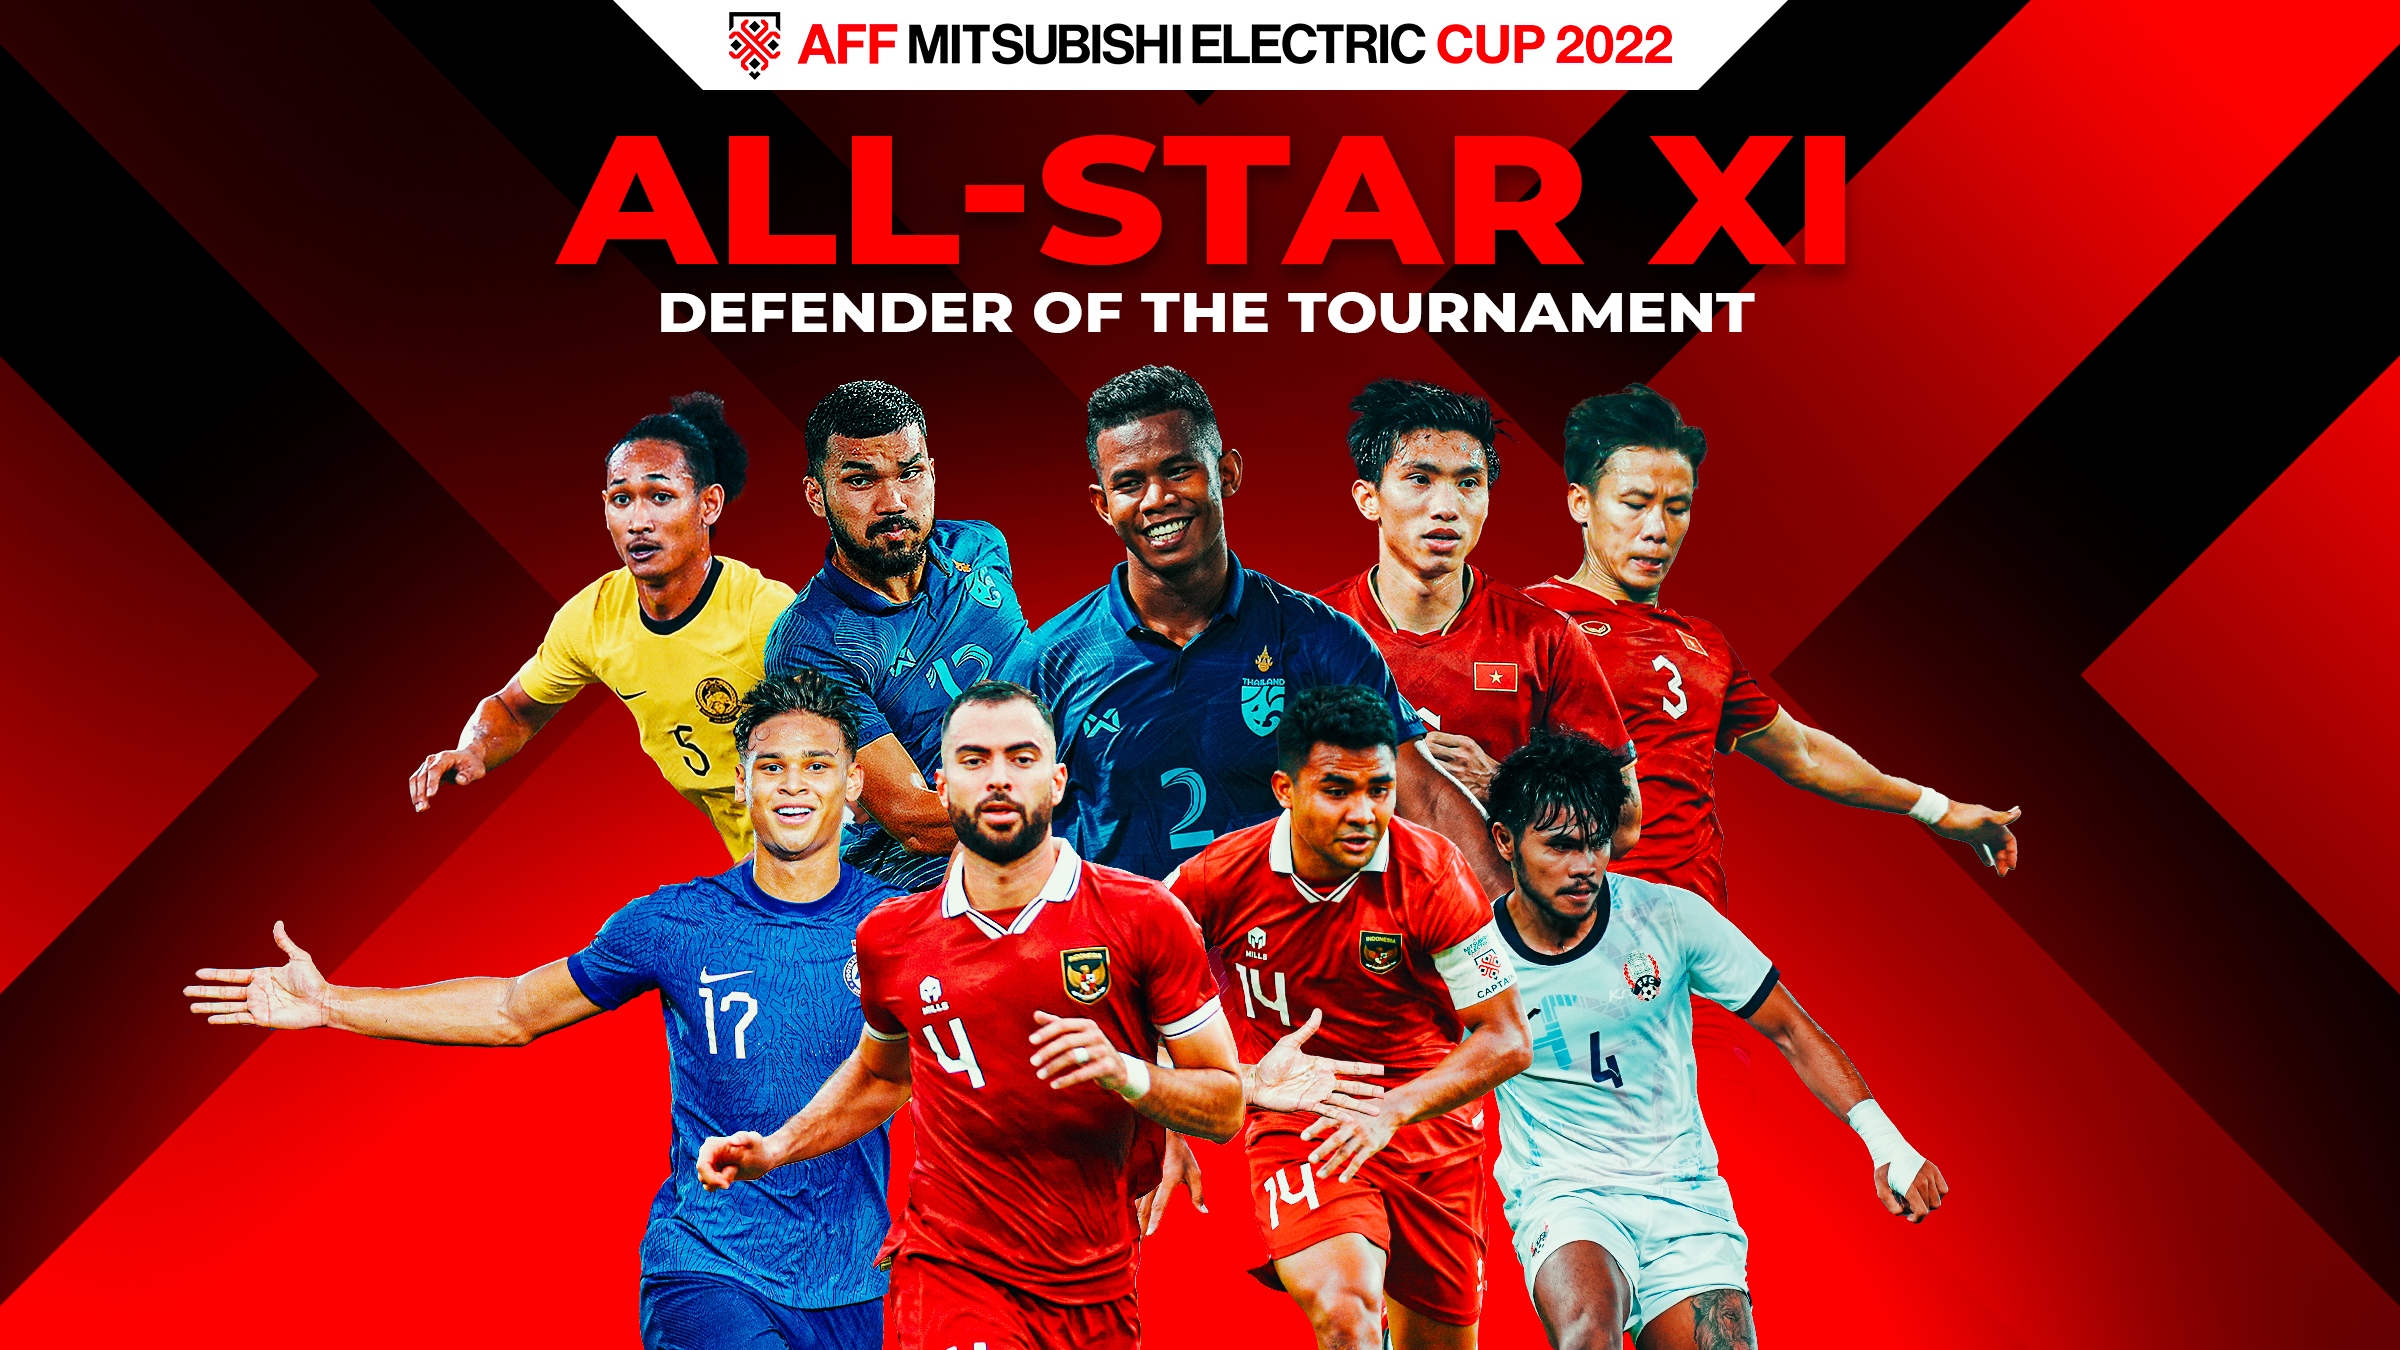 Vote For Your All-Star XI Defender Of The Tournament